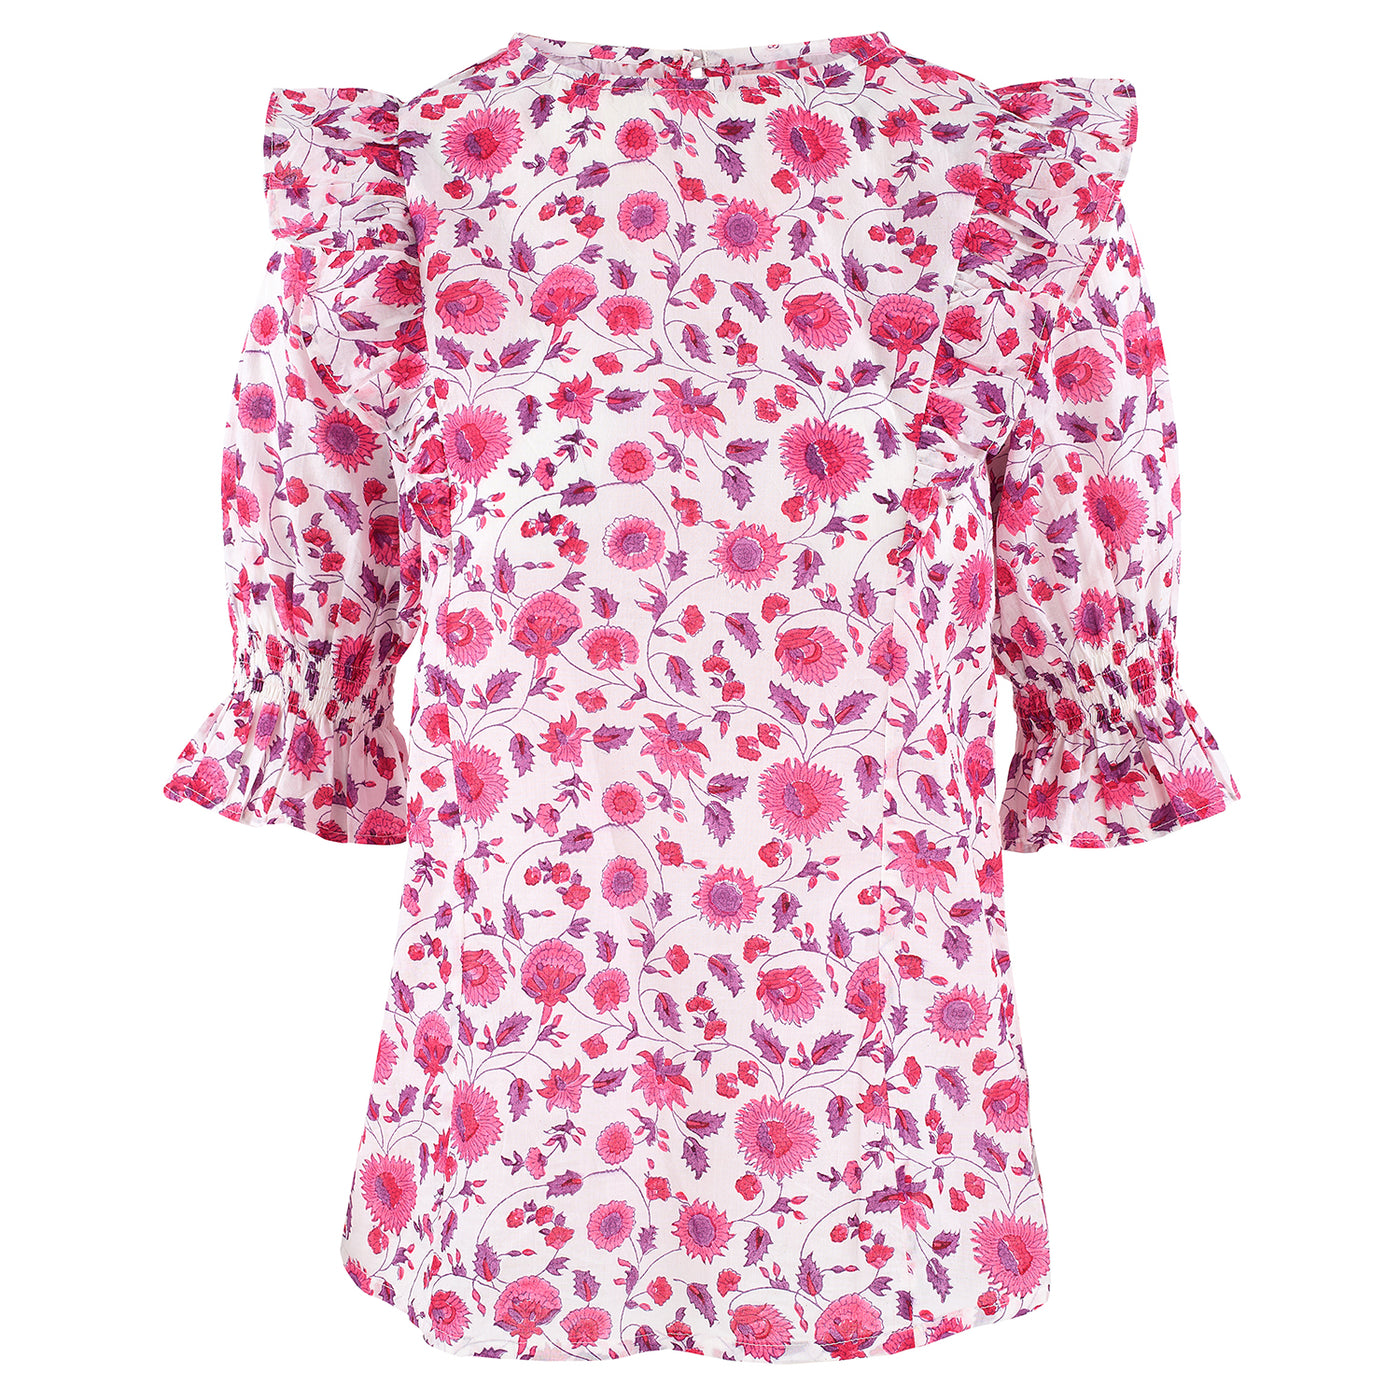 Emily Floral Top In Rani Pink